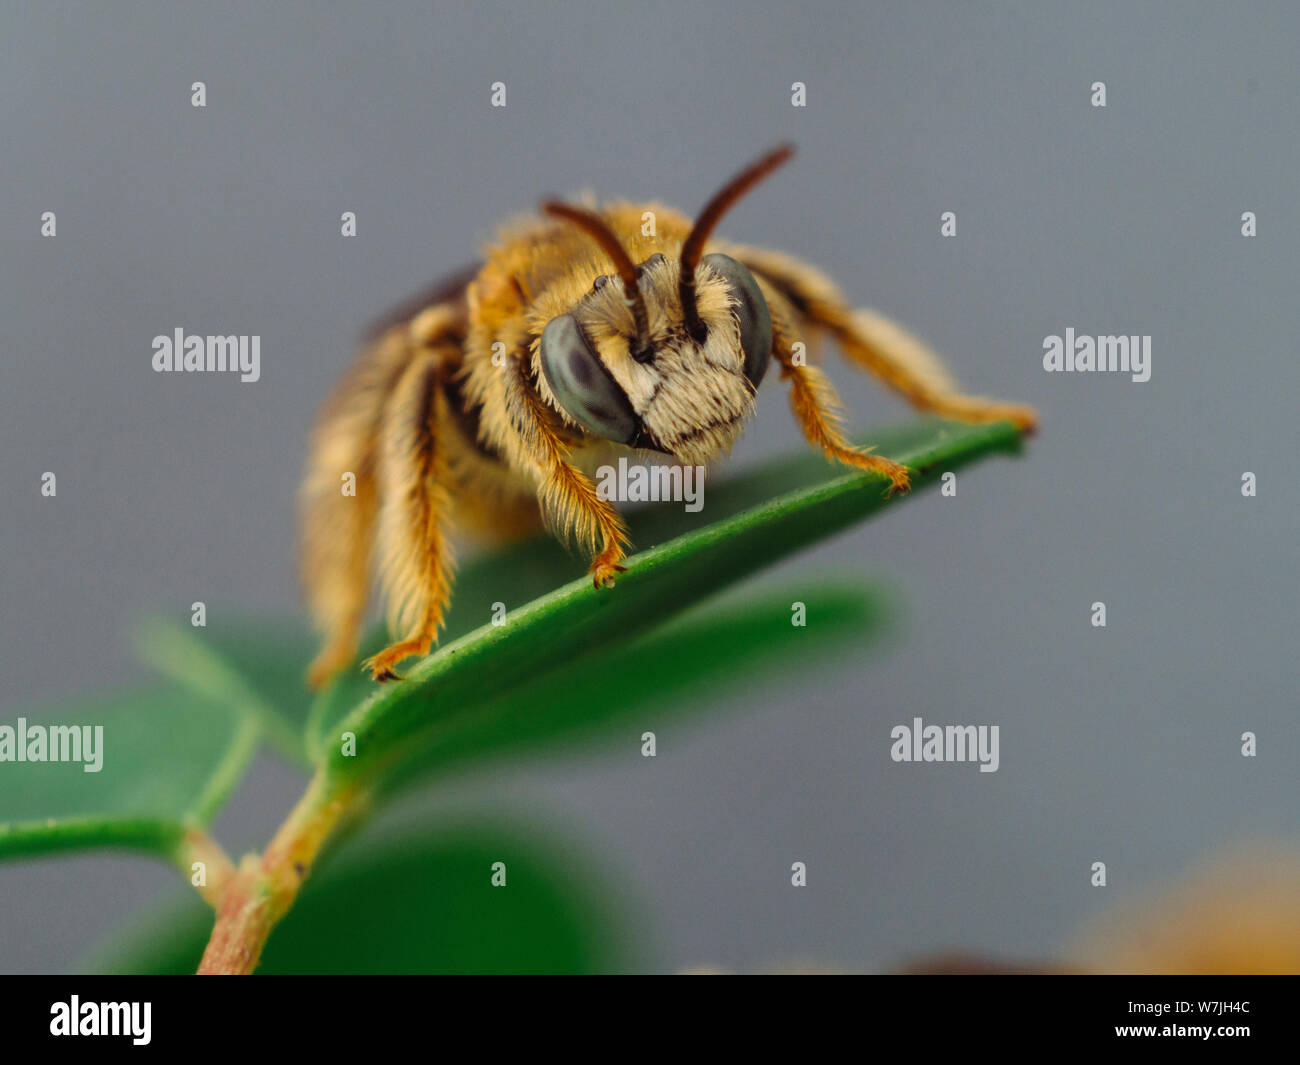 Frontal close-up of a native bee, Exomalopsis, sitting on a Moringa plant in a tropical garden Stock Photo